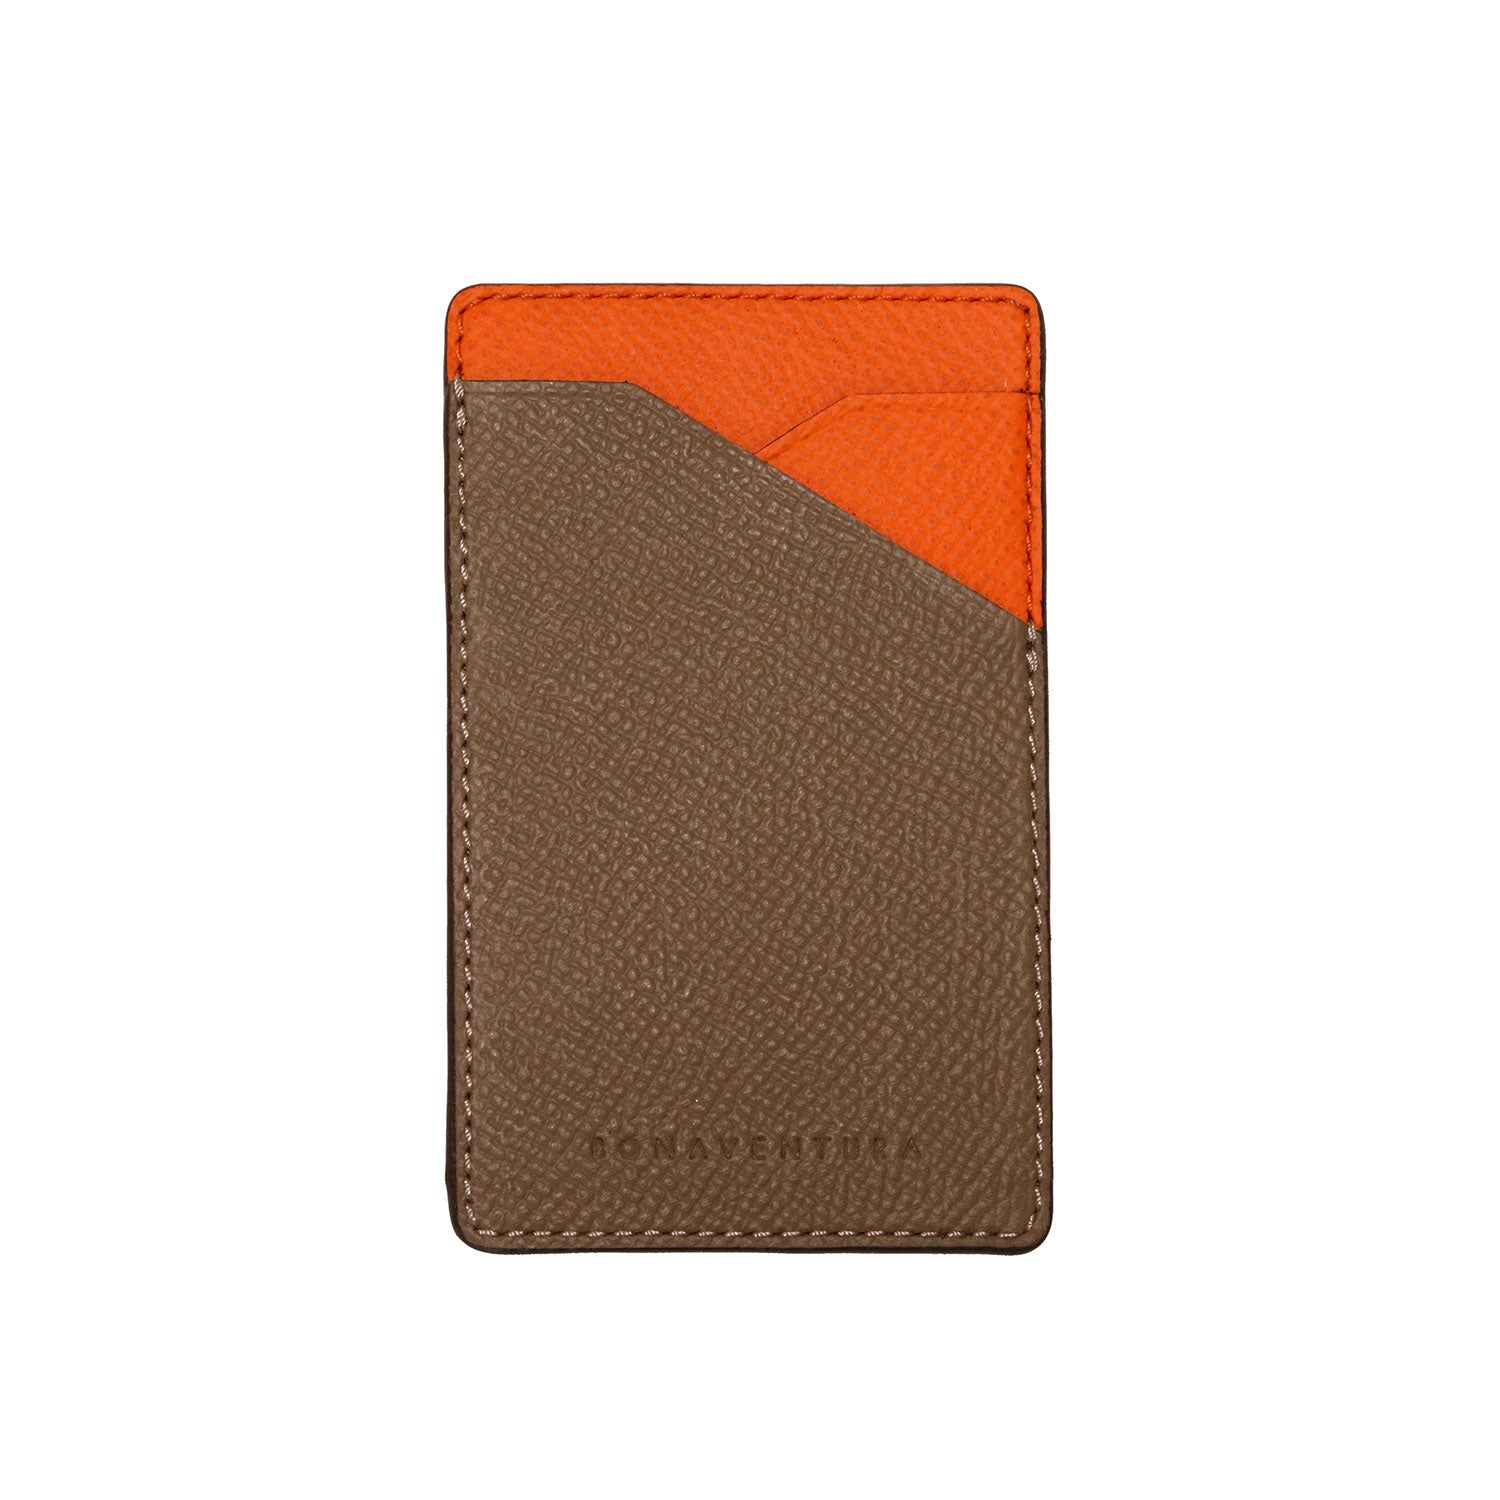 Detachable card slots in Noblesse leather